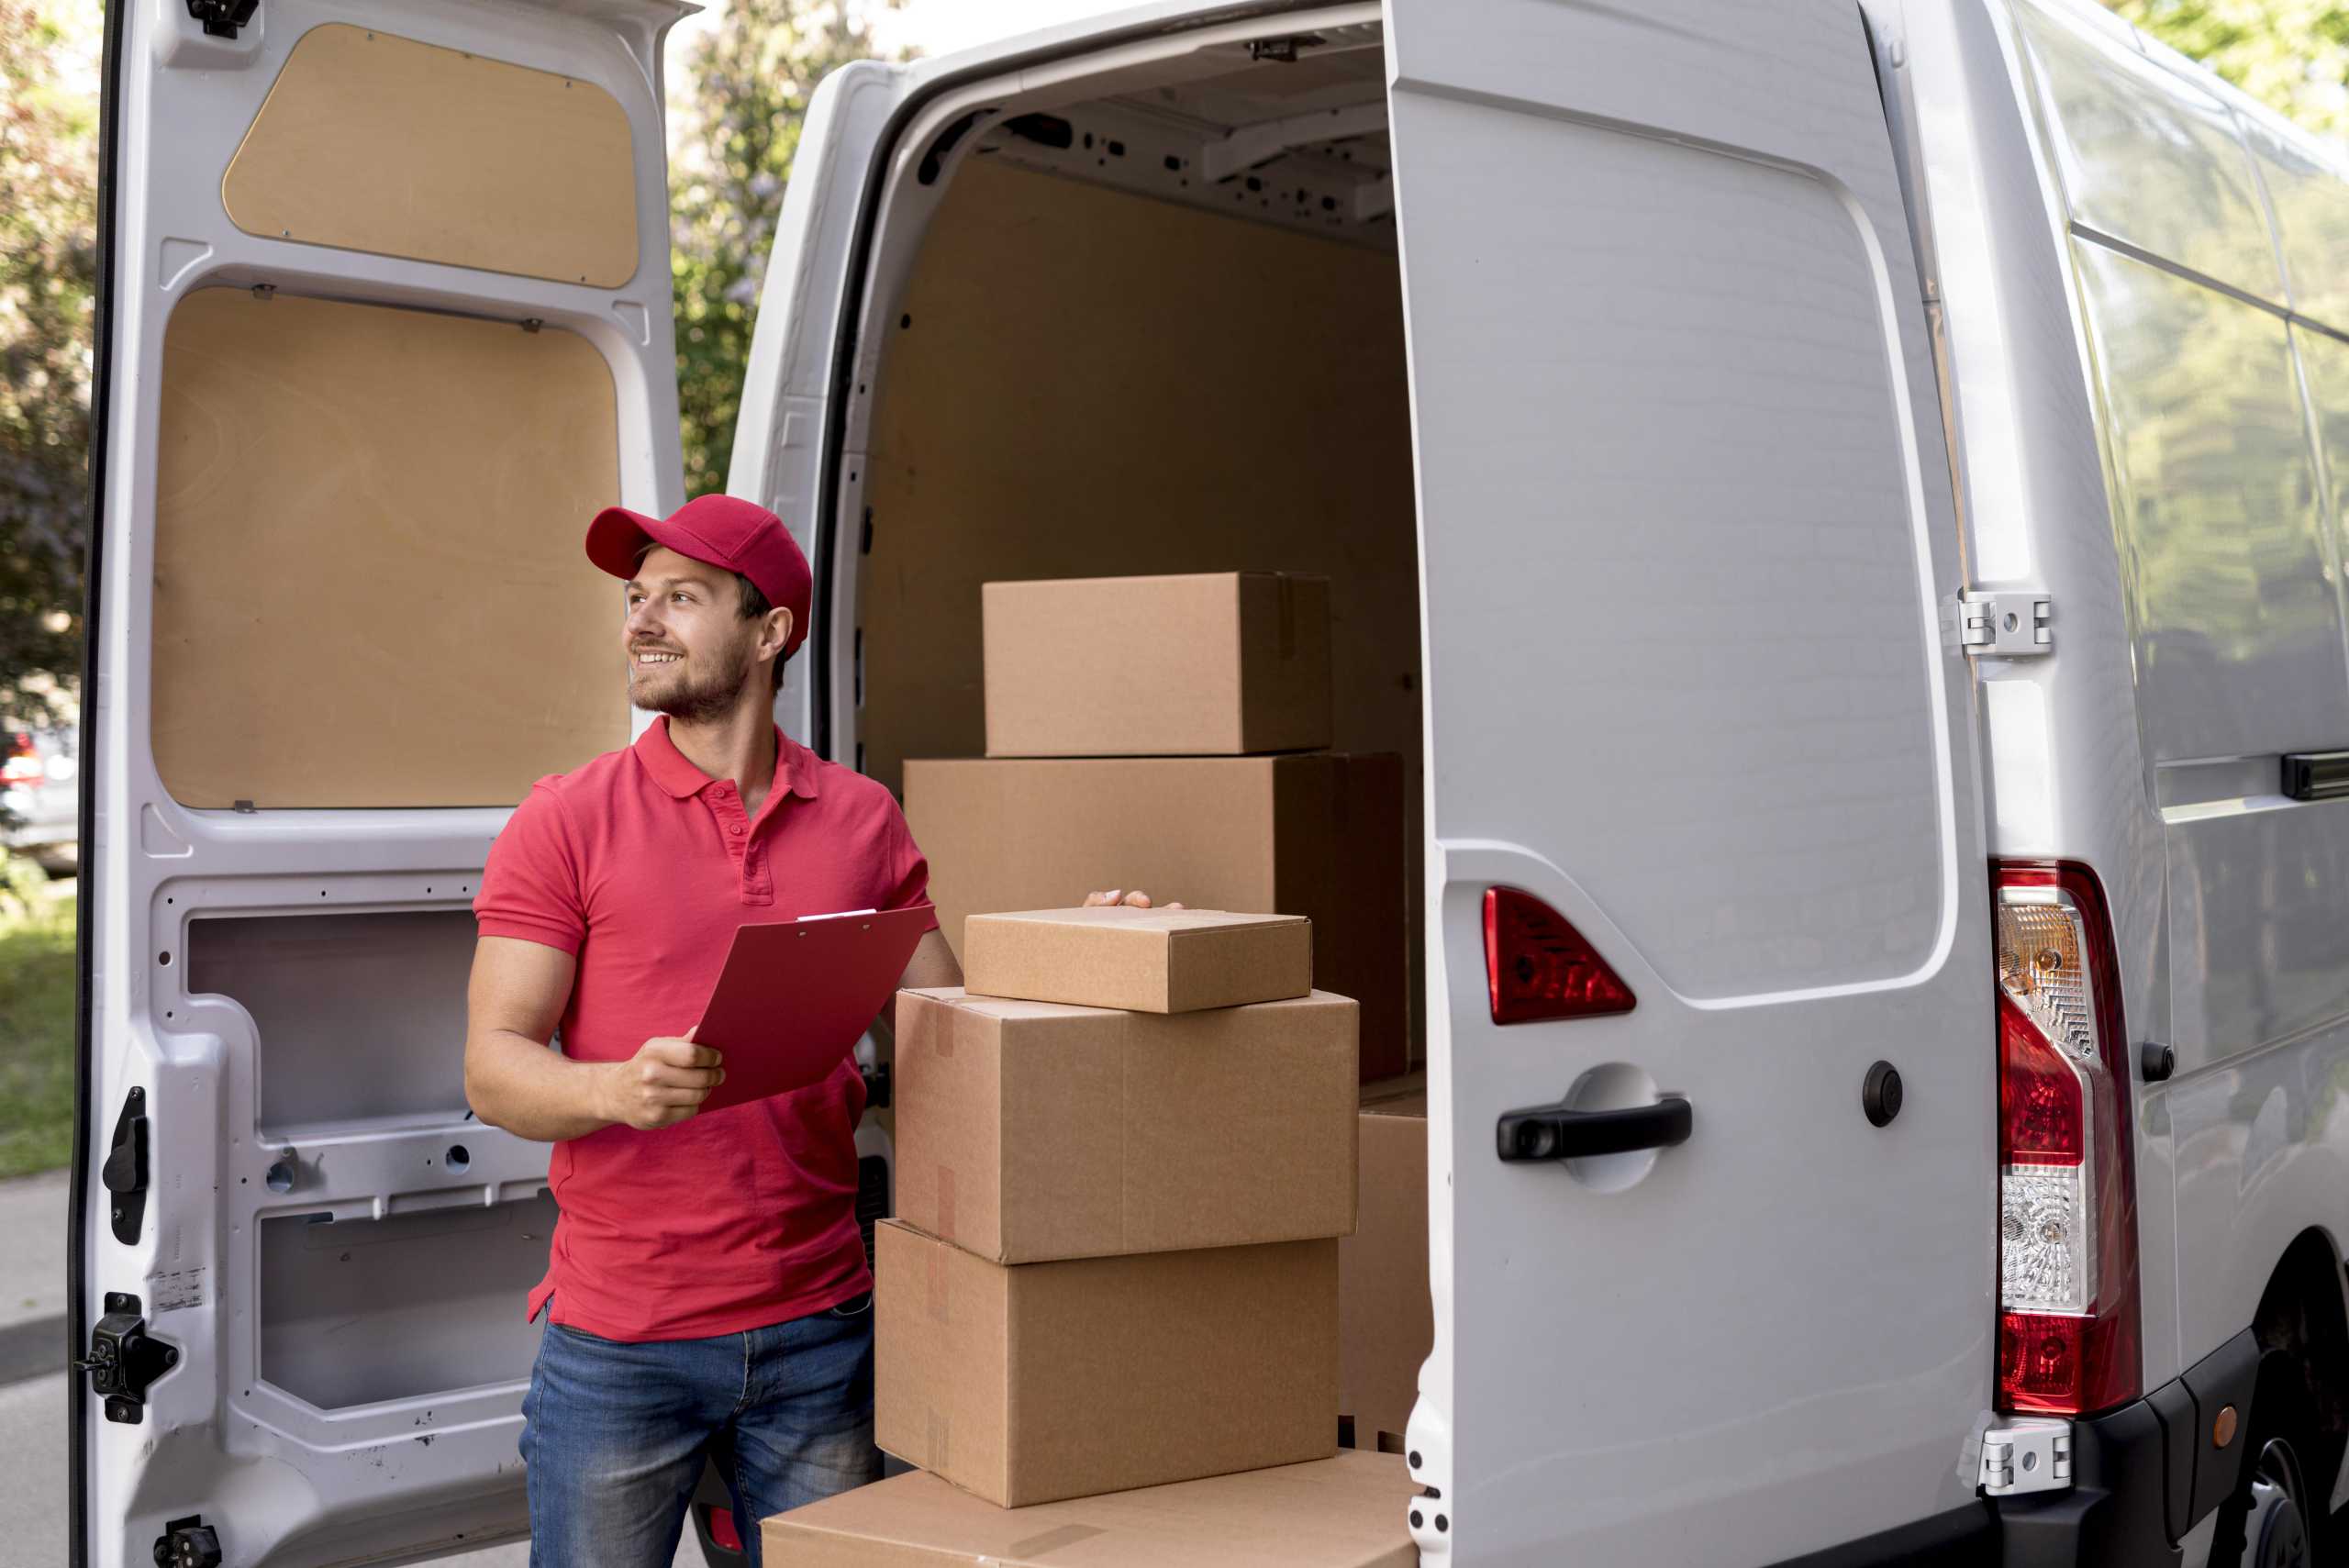 Delivery person loading a delivery van with parcels